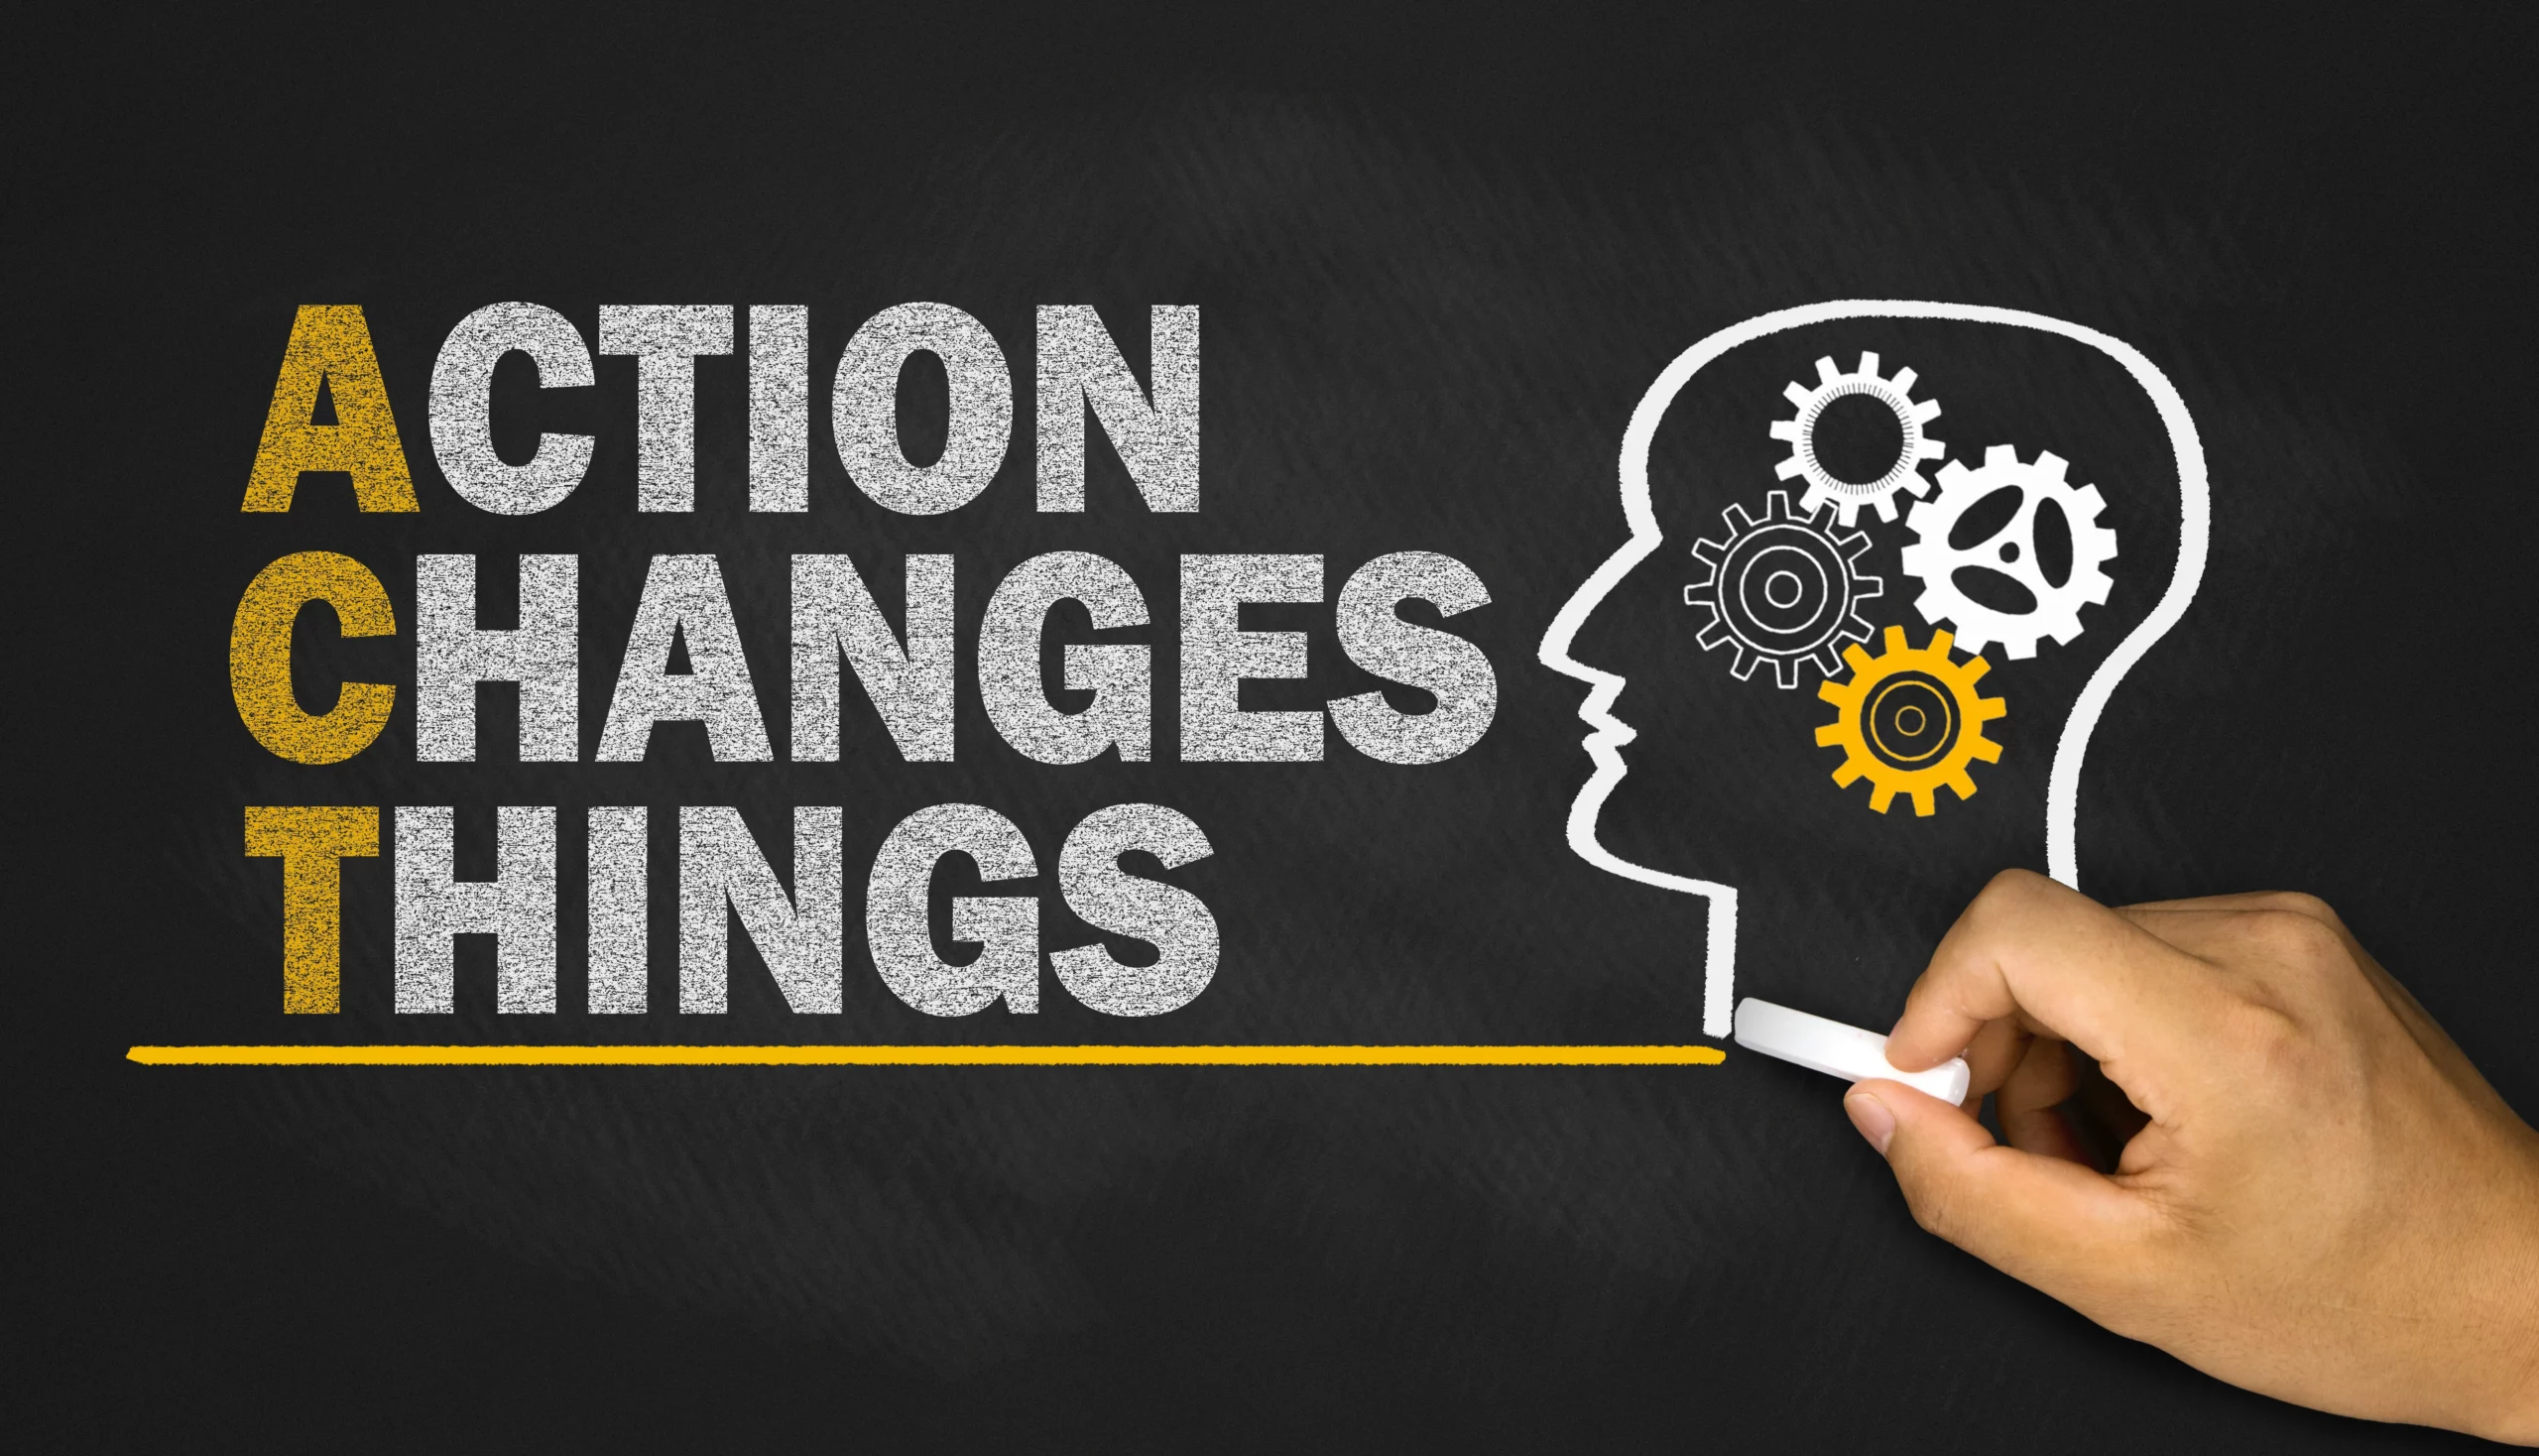 ACT: Action Changes Things